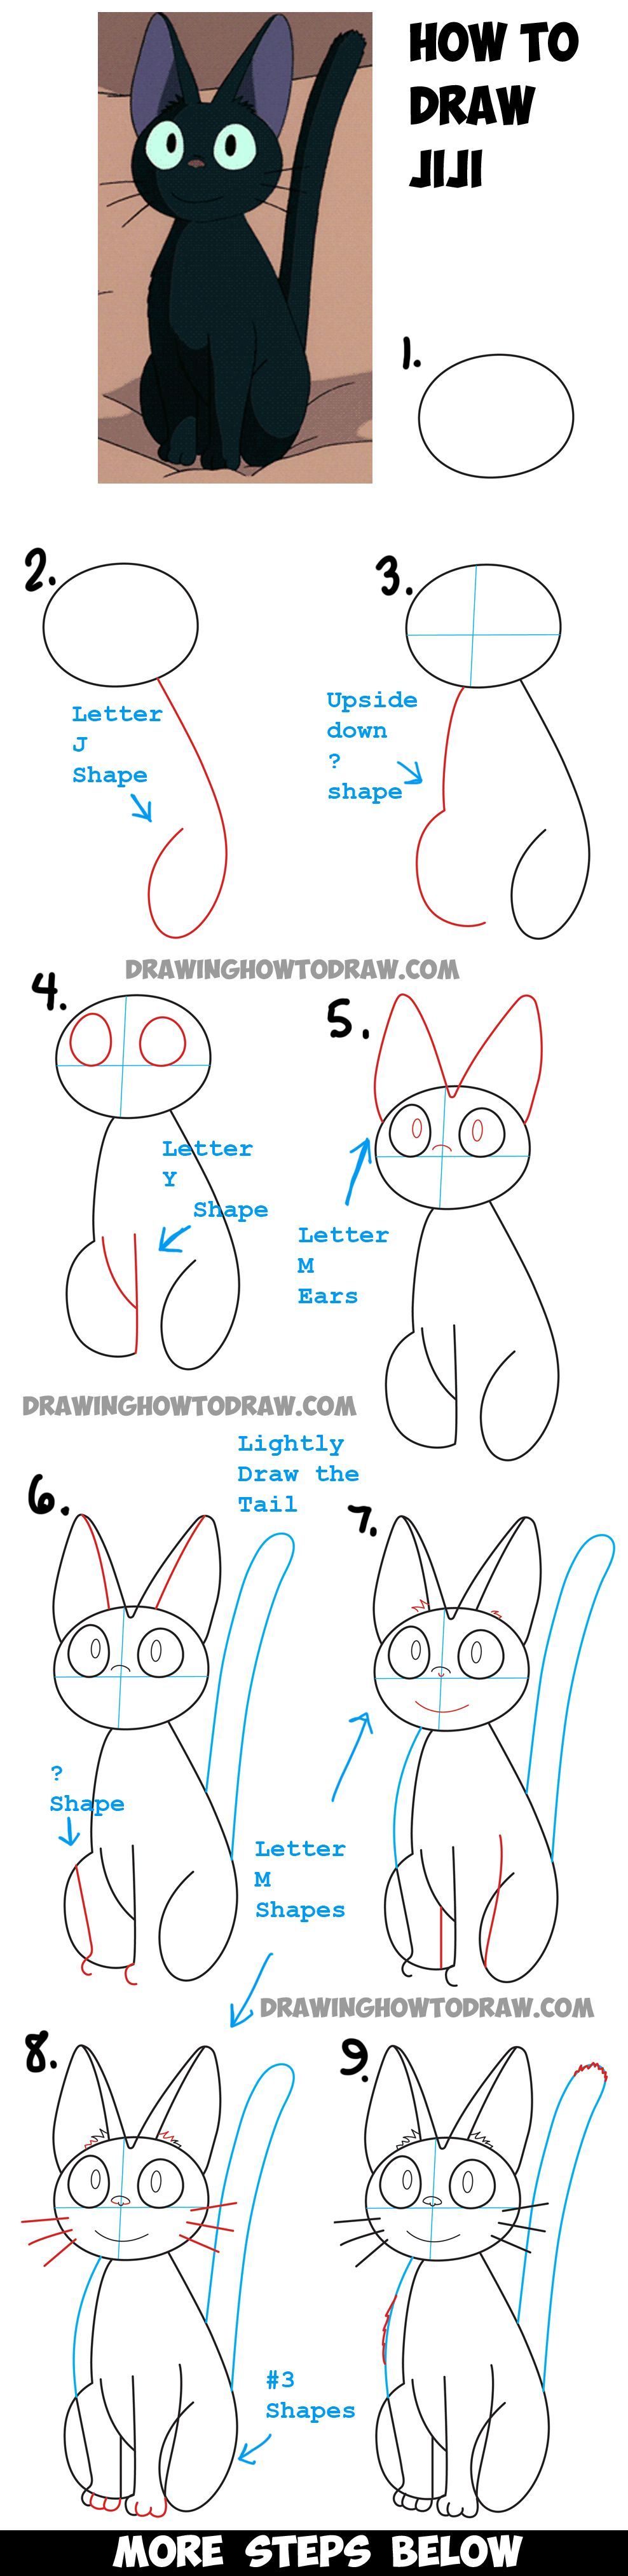 Learn How to Draw Jiji from Kikis Delivery Service – Simple Steps Drawing Lesson